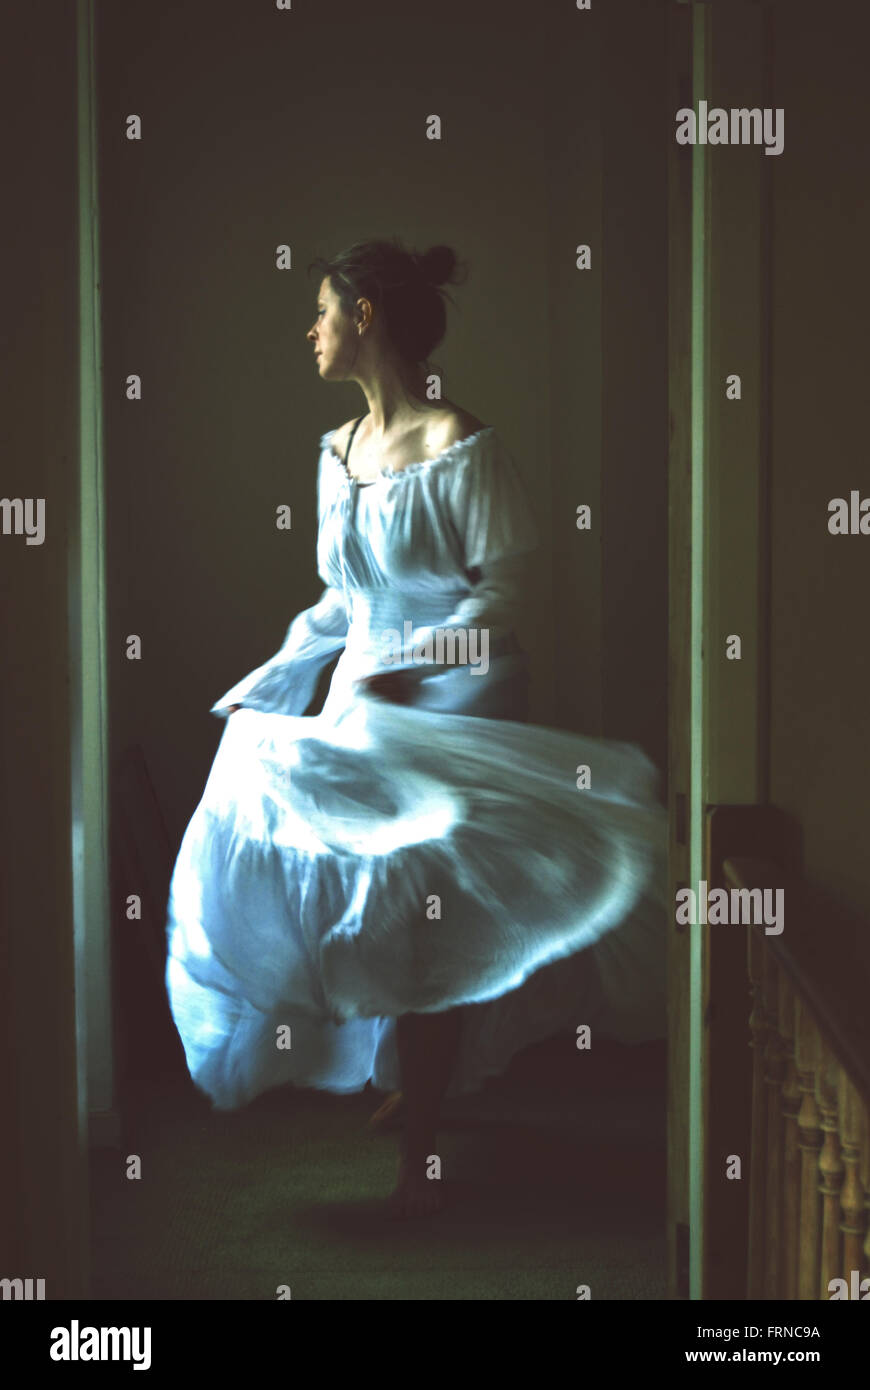 young woman dancing in an old house wearing white long romantic dress Stock Photo